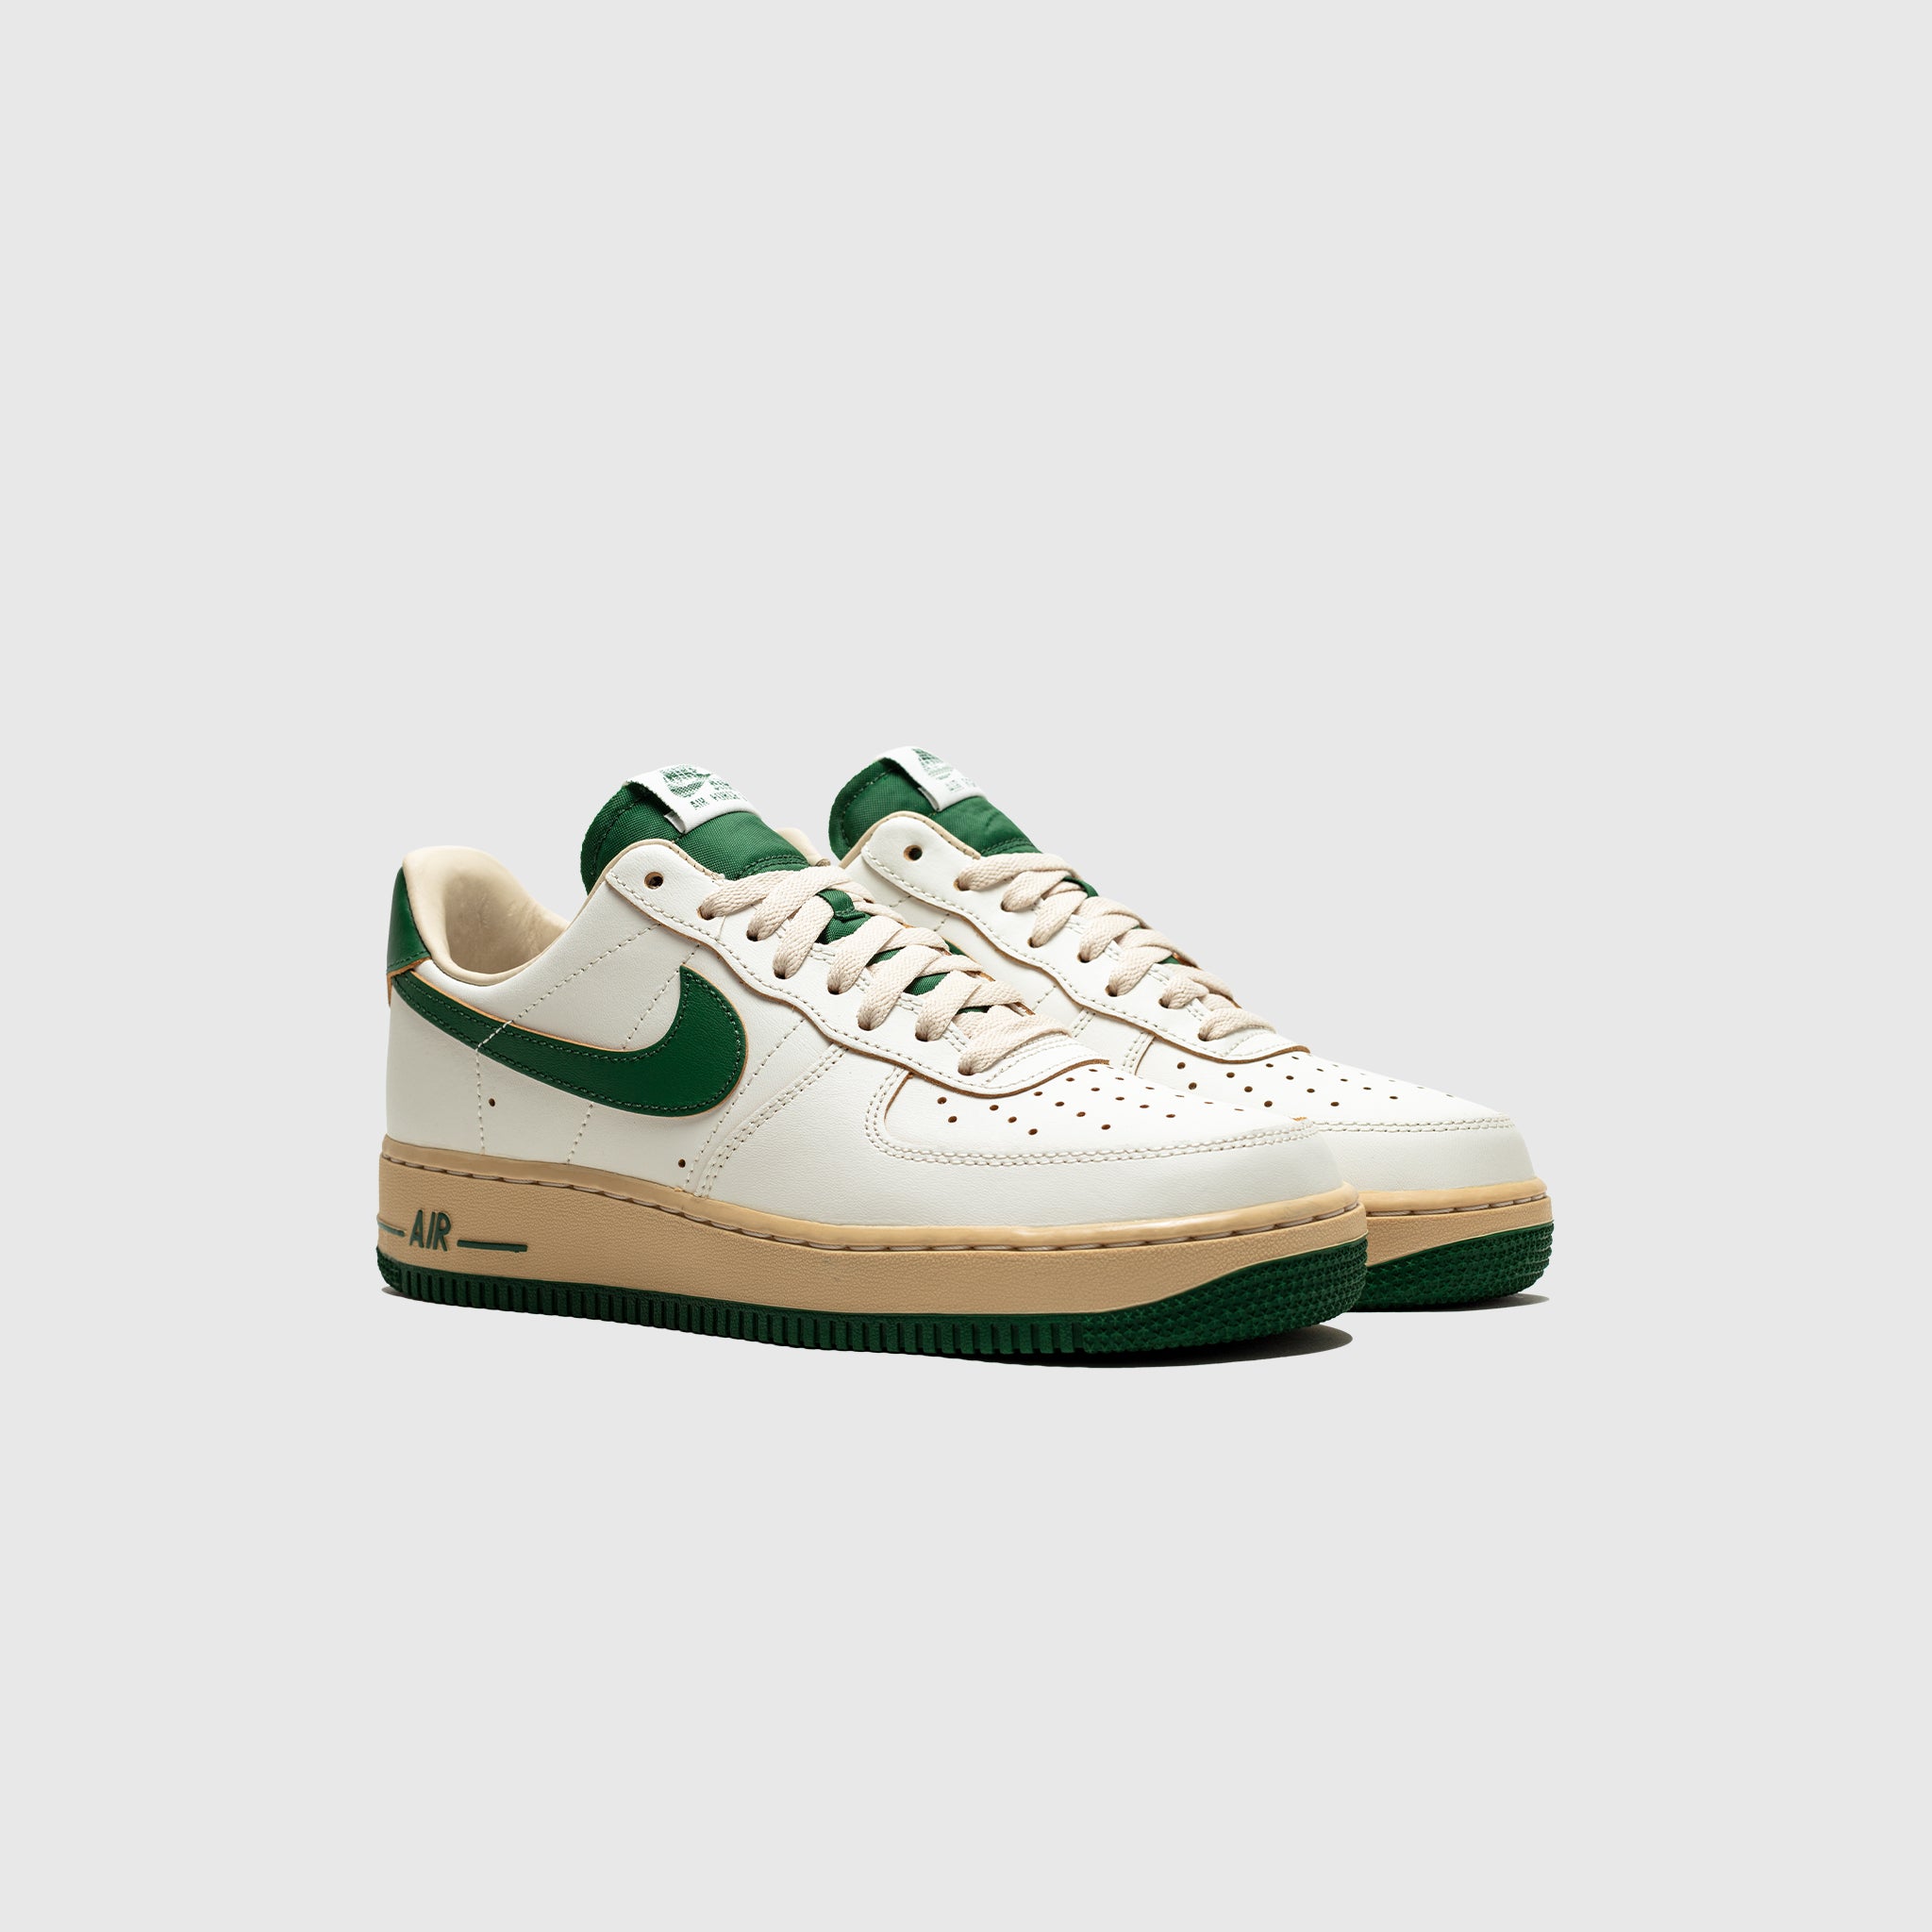 WMNS AIR FORCE 1 '07 LV8 "GORGE GREEN" – PACKER SHOES